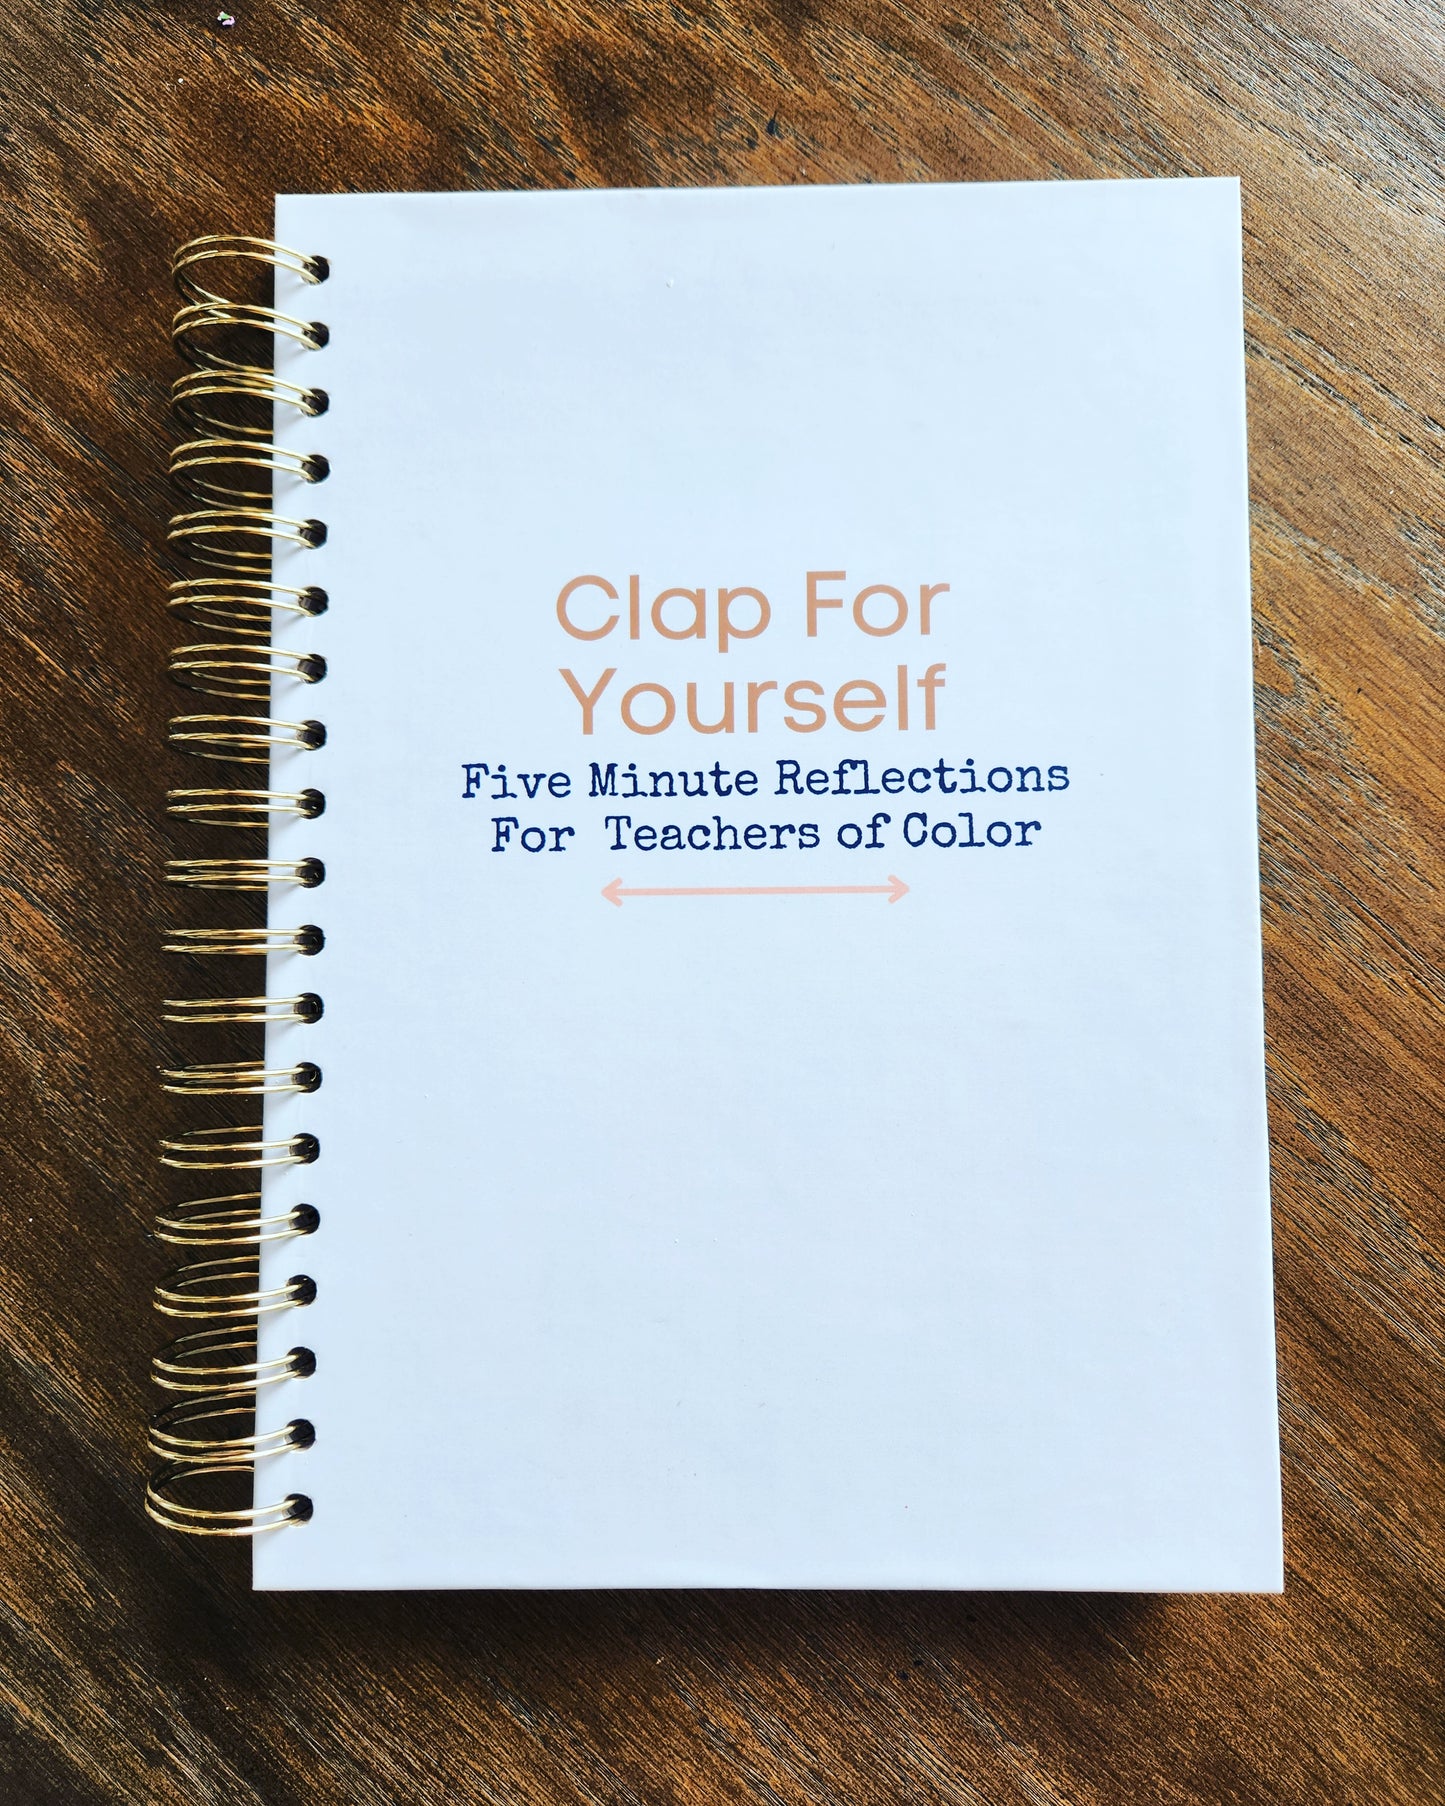 Clap For Yourself: 5 Minute Reflections for Teachers of Color (Hard Copy)